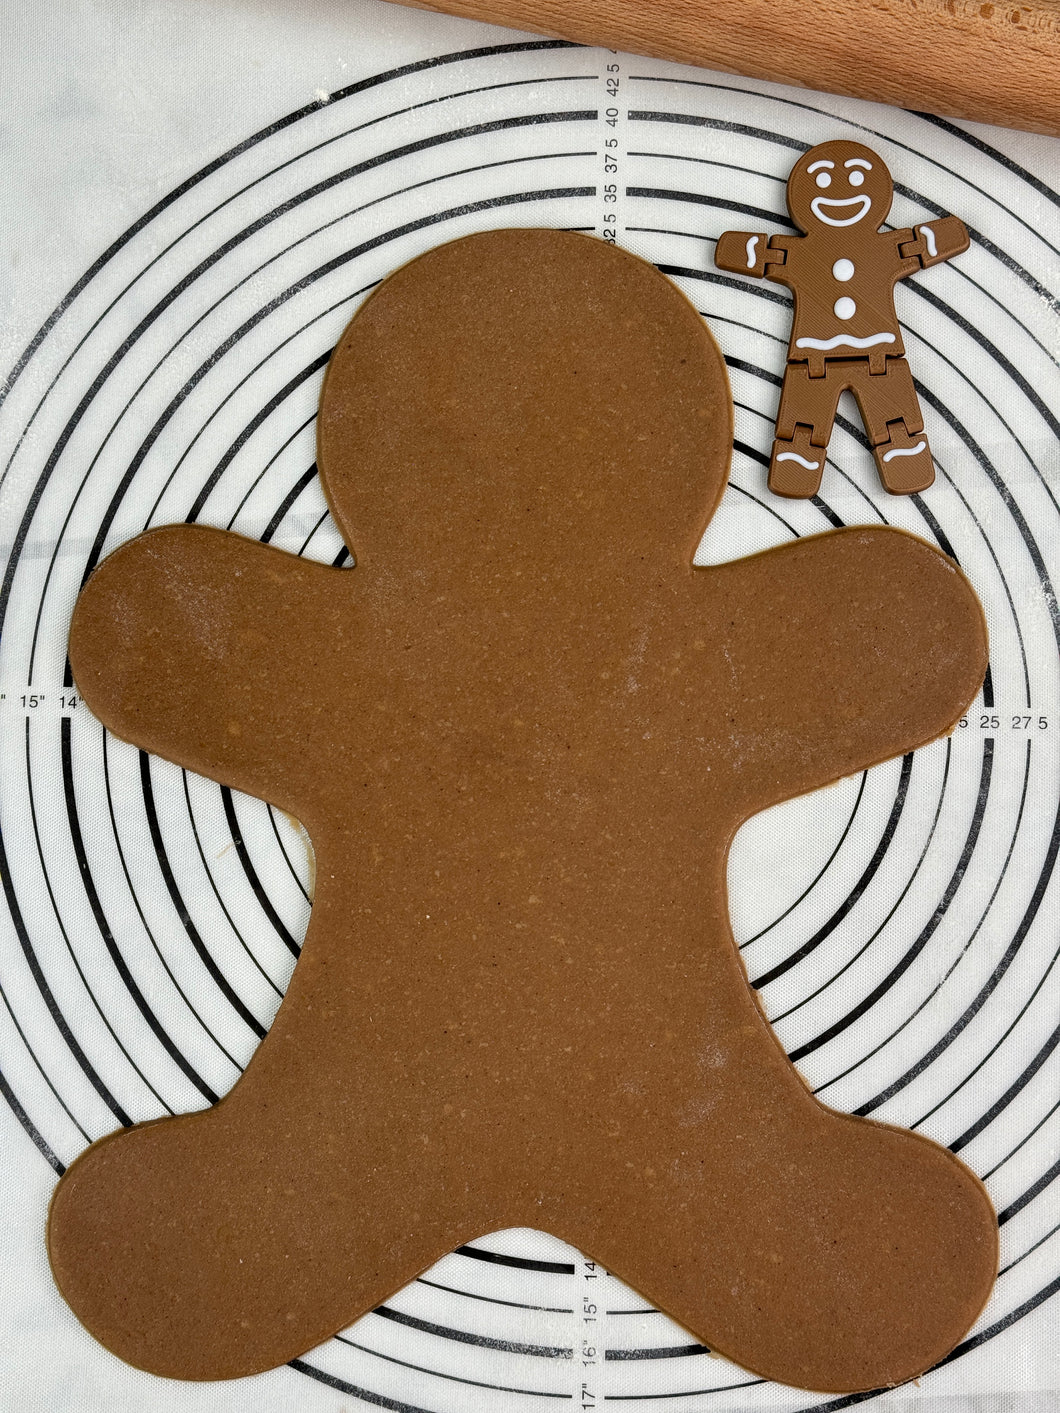 Giant Gingerbread Man Cookie Cutter and Mold (Size - 15” inches)